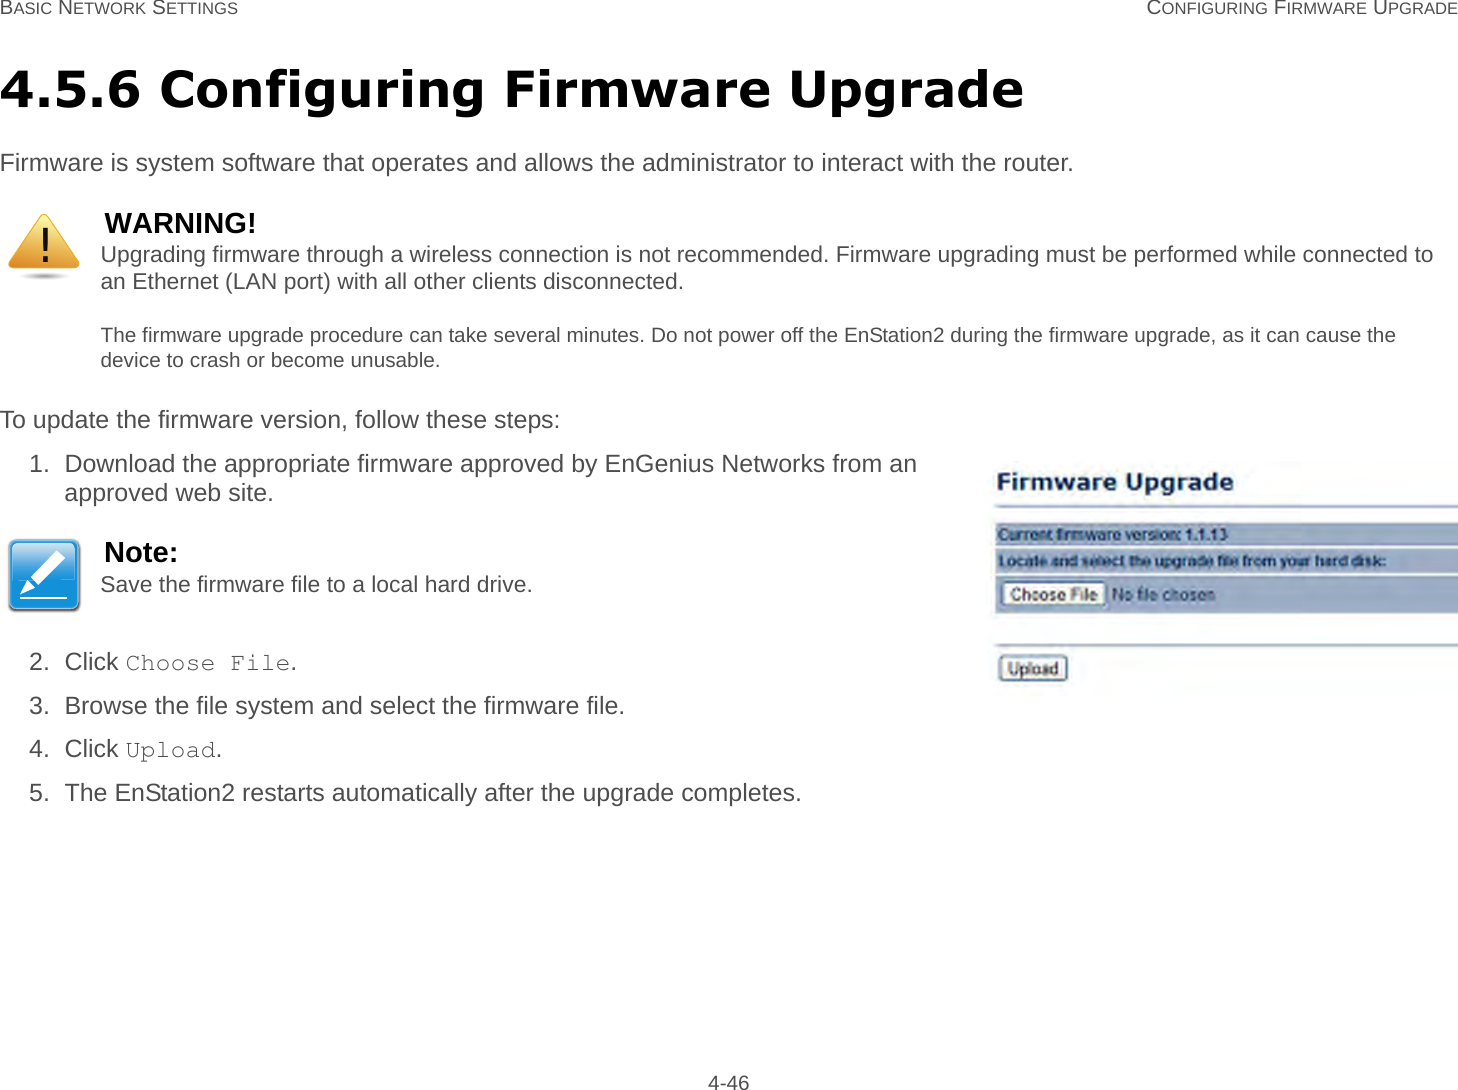 BASIC NETWORK SETTINGS CONFIGURING FIRMWARE UPGRADE 4-464.5.6 Configuring Firmware UpgradeFirmware is system software that operates and allows the administrator to interact with the router.To update the firmware version, follow these steps:1. Download the appropriate firmware approved by EnGenius Networks from an approved web site.2. Click Choose File.3. Browse the file system and select the firmware file.4. Click Upload.5. The EnStation2 restarts automatically after the upgrade completes.WARNING!Upgrading firmware through a wireless connection is not recommended. Firmware upgrading must be performed while connected to an Ethernet (LAN port) with all other clients disconnected.The firmware upgrade procedure can take several minutes. Do not power off the EnStation2 during the firmware upgrade, as it can cause the device to crash or become unusable.Note:Save the firmware file to a local hard drive.!